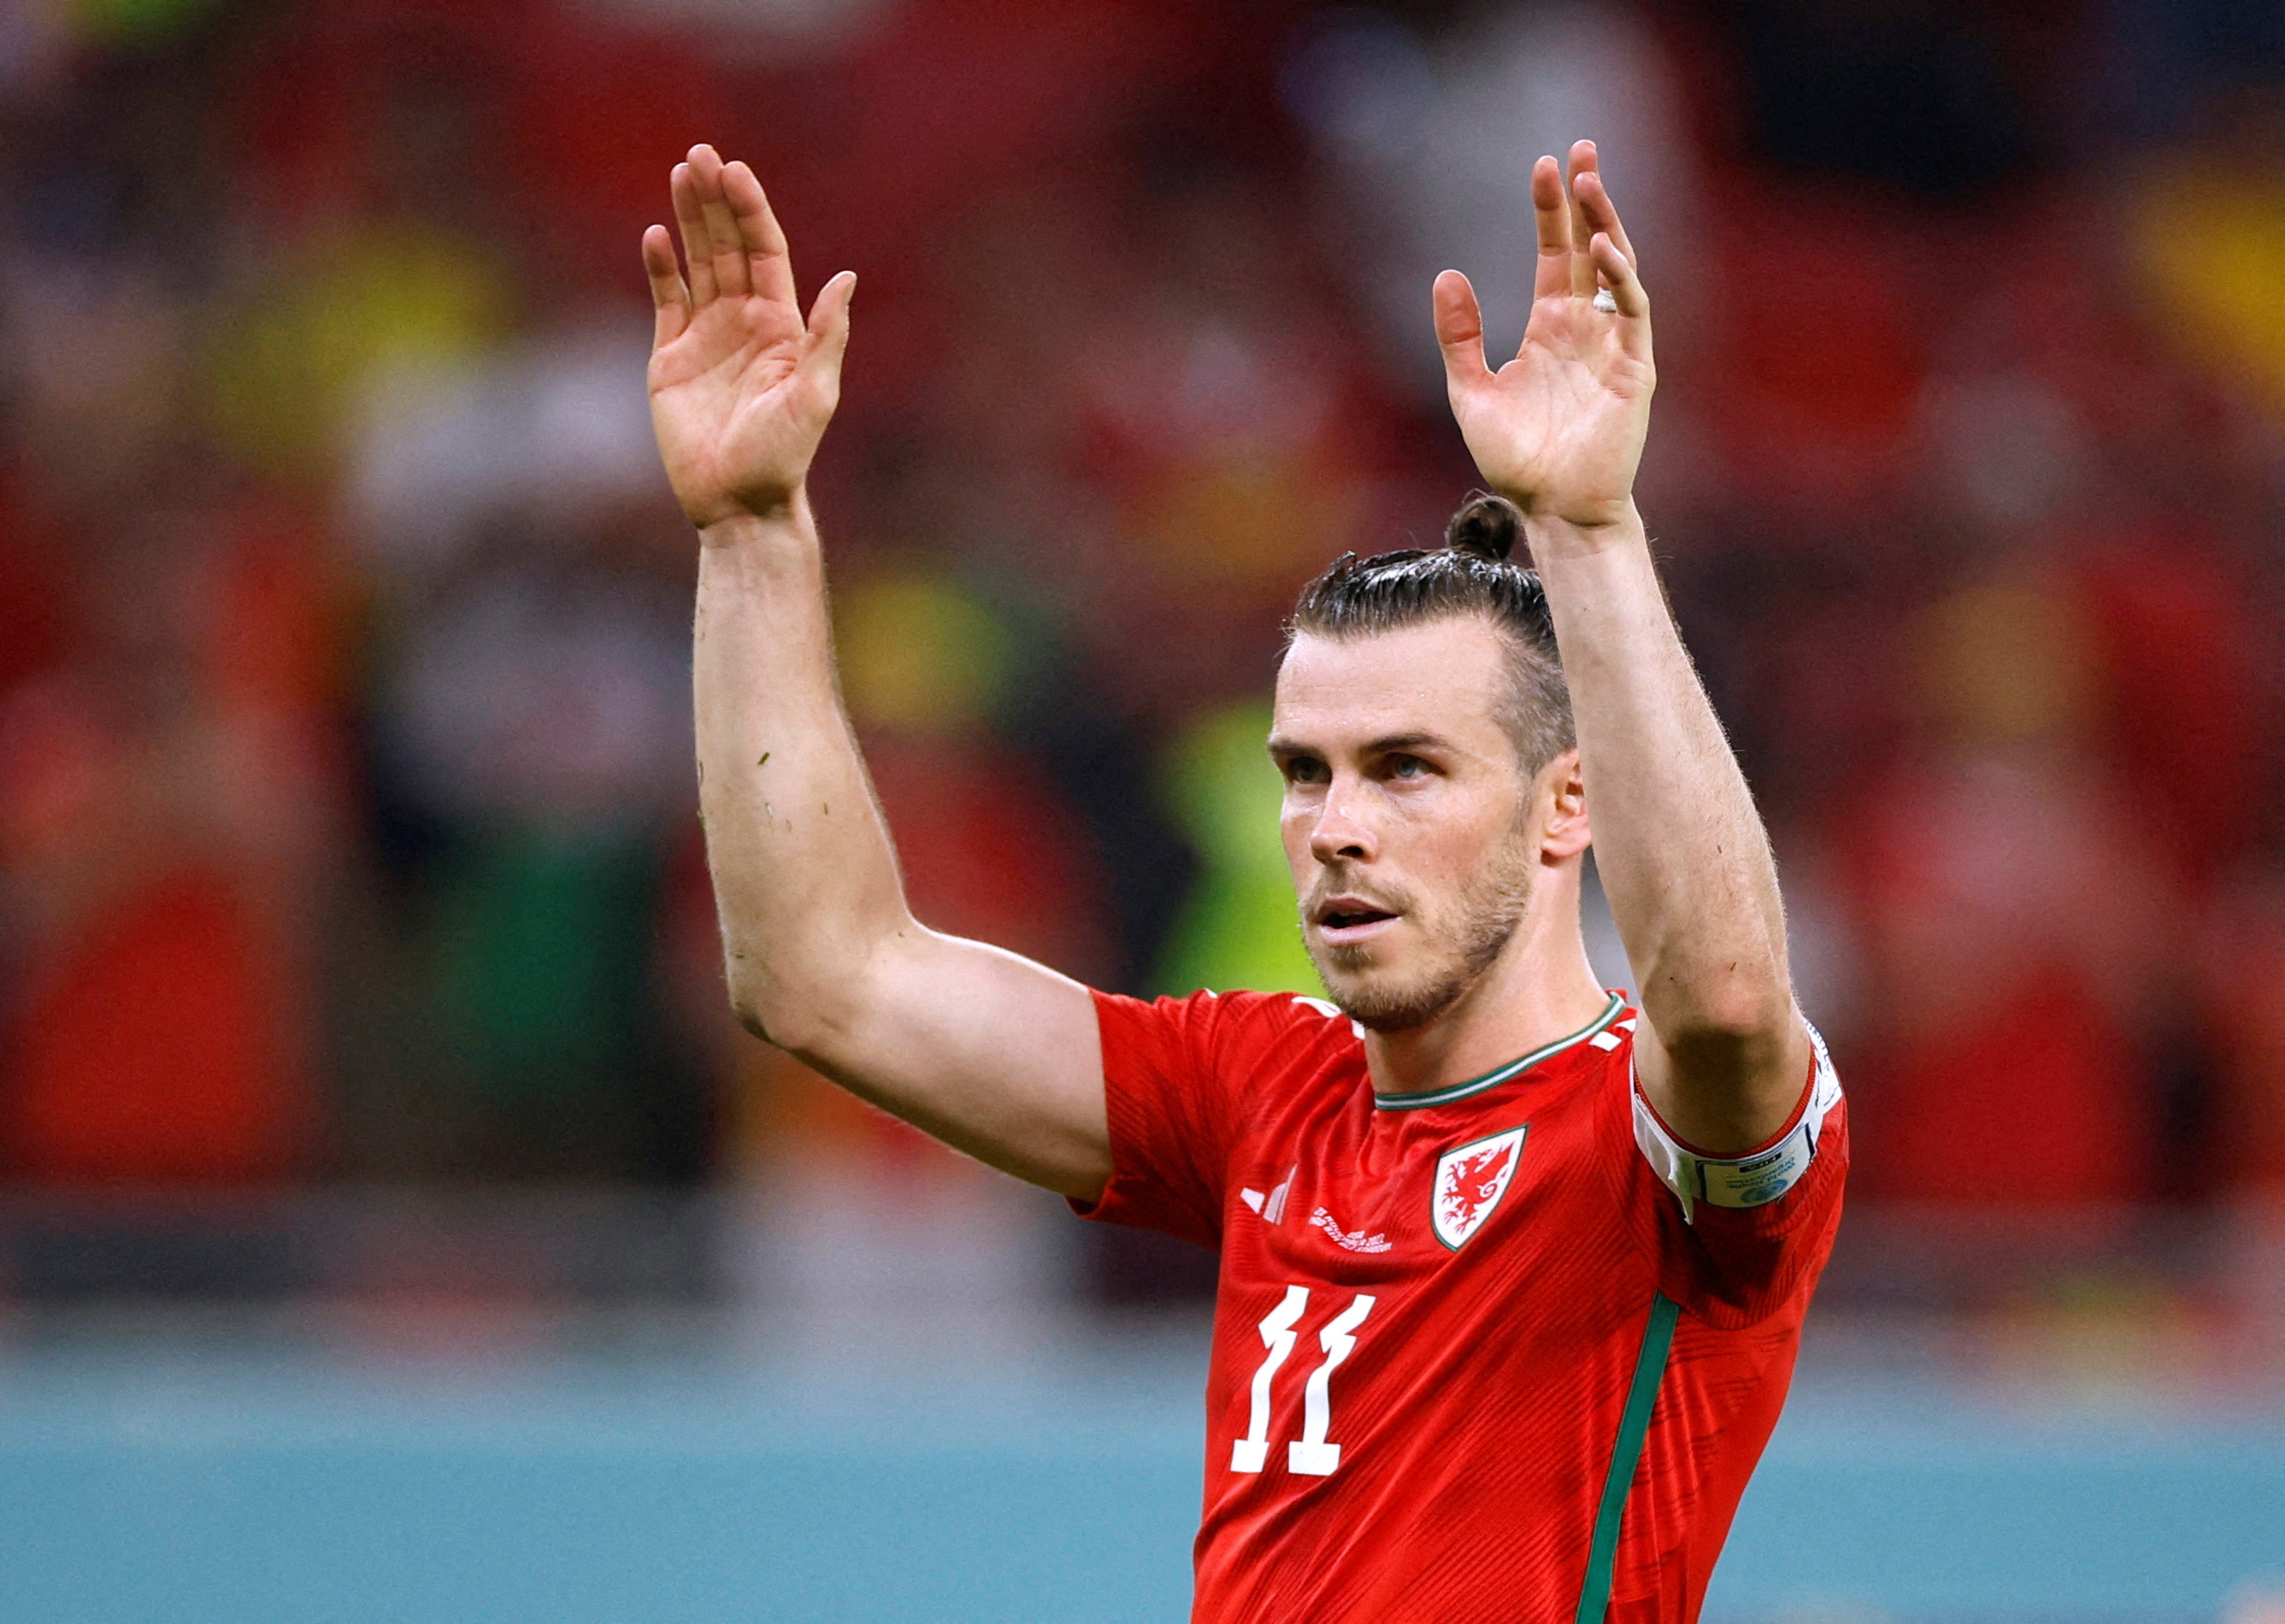 Wales captain Bale announces end of playing career